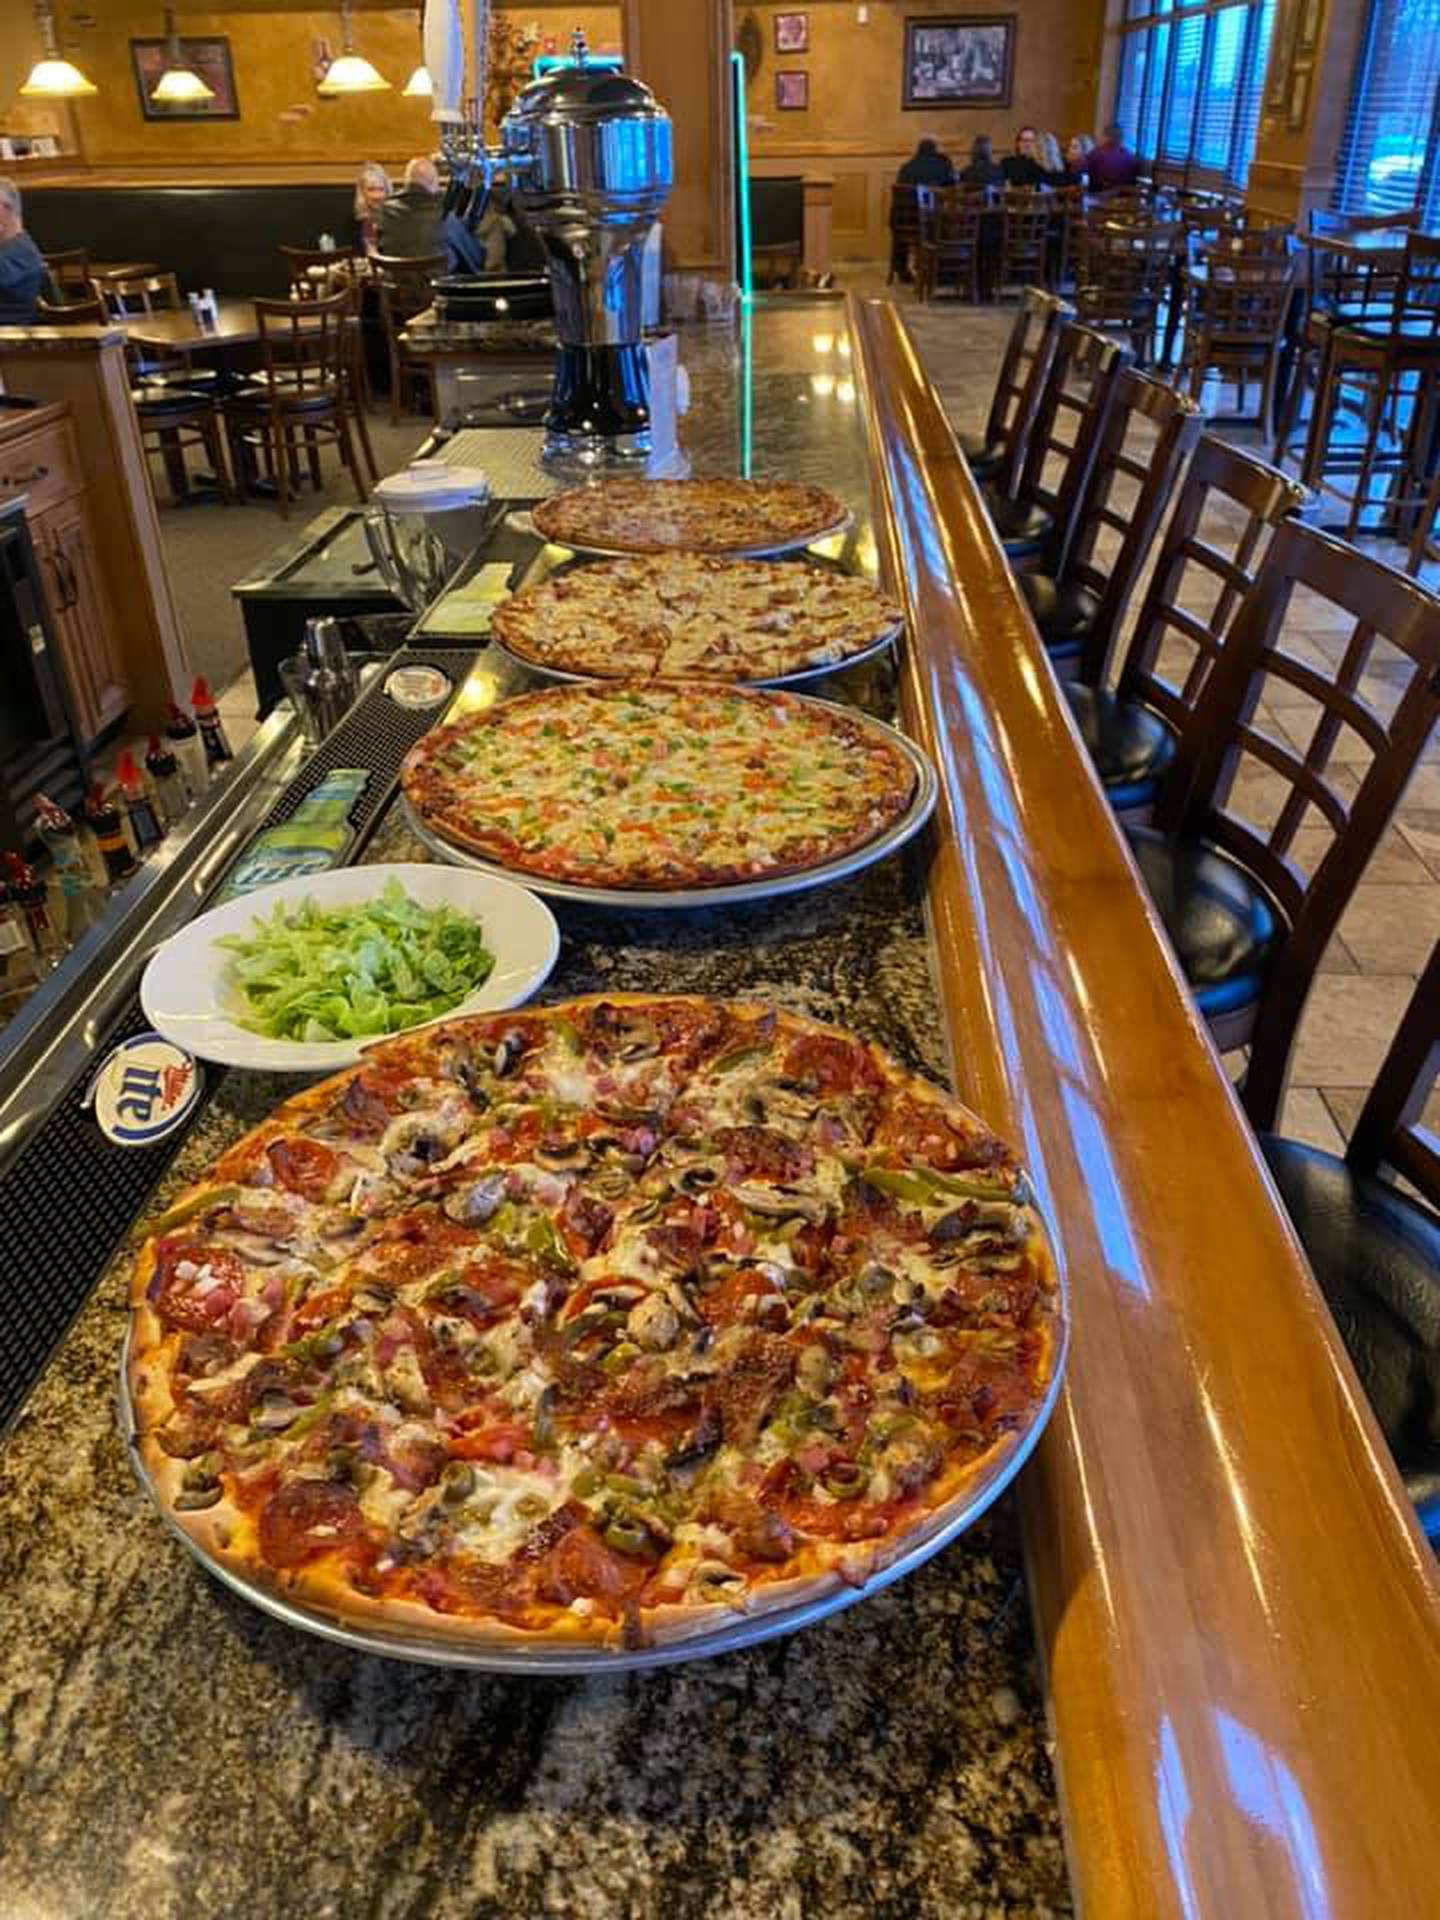 La Piazza Italian Restaurant in Coal City was voted in the top 10 pizza places in Grundy County by readers in 2021. (Photo from La Piazza Italian Restaurant Facebook page)